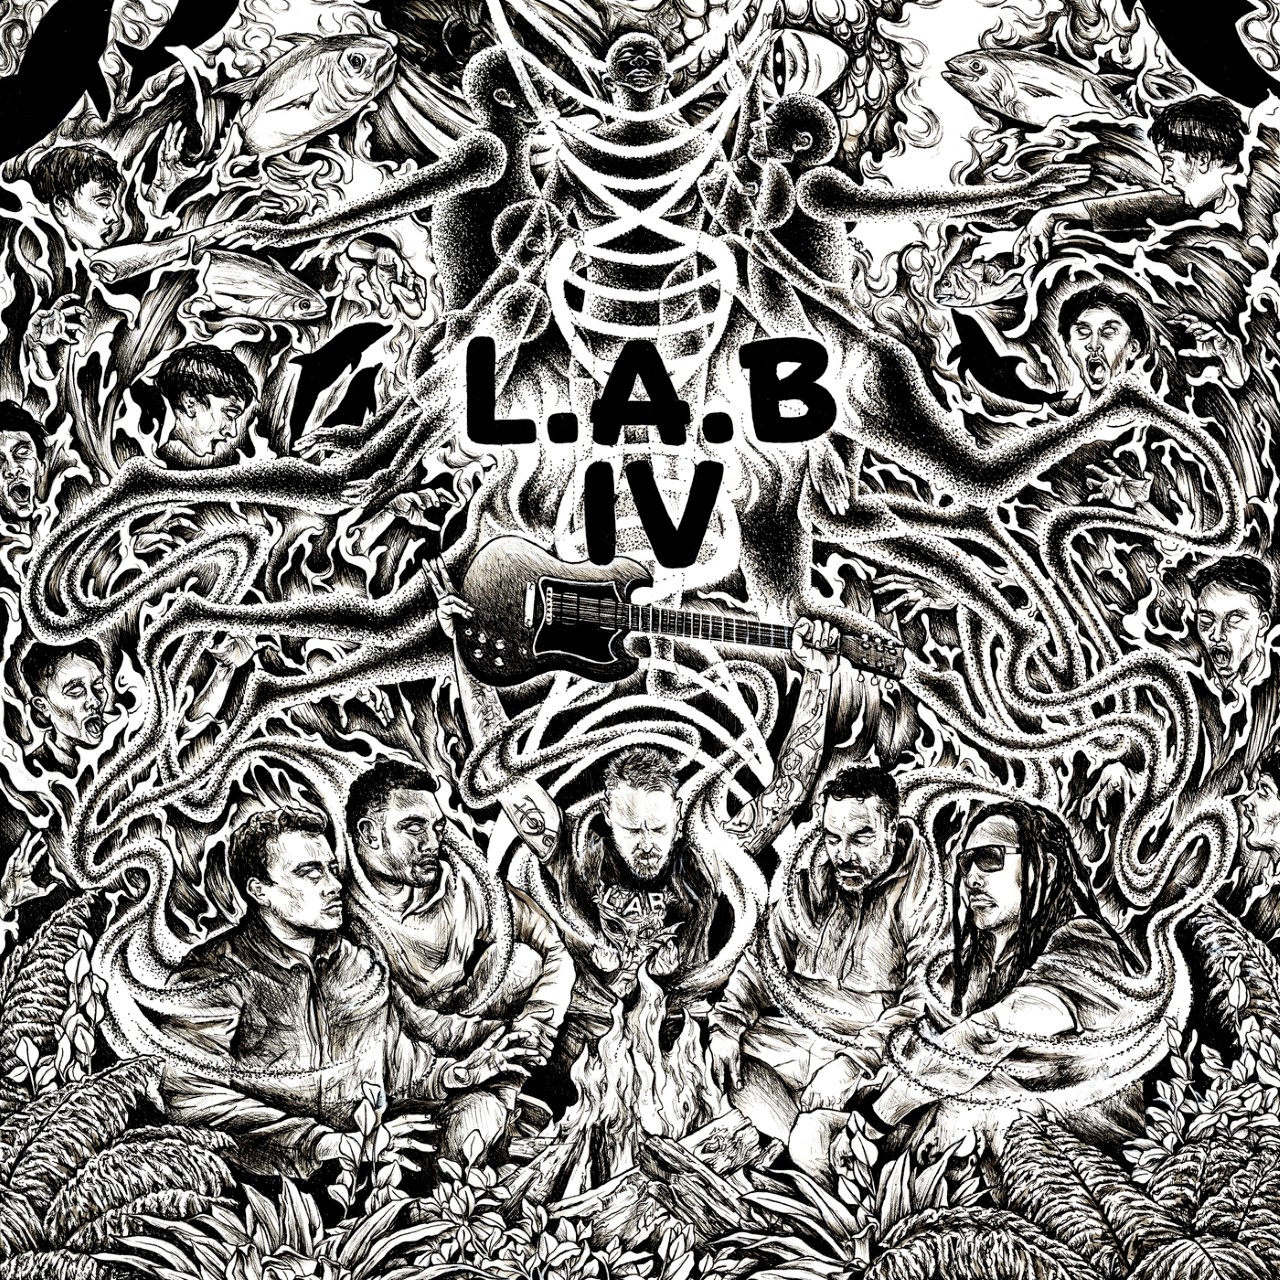 Art for Why Oh Why by L.A.B.